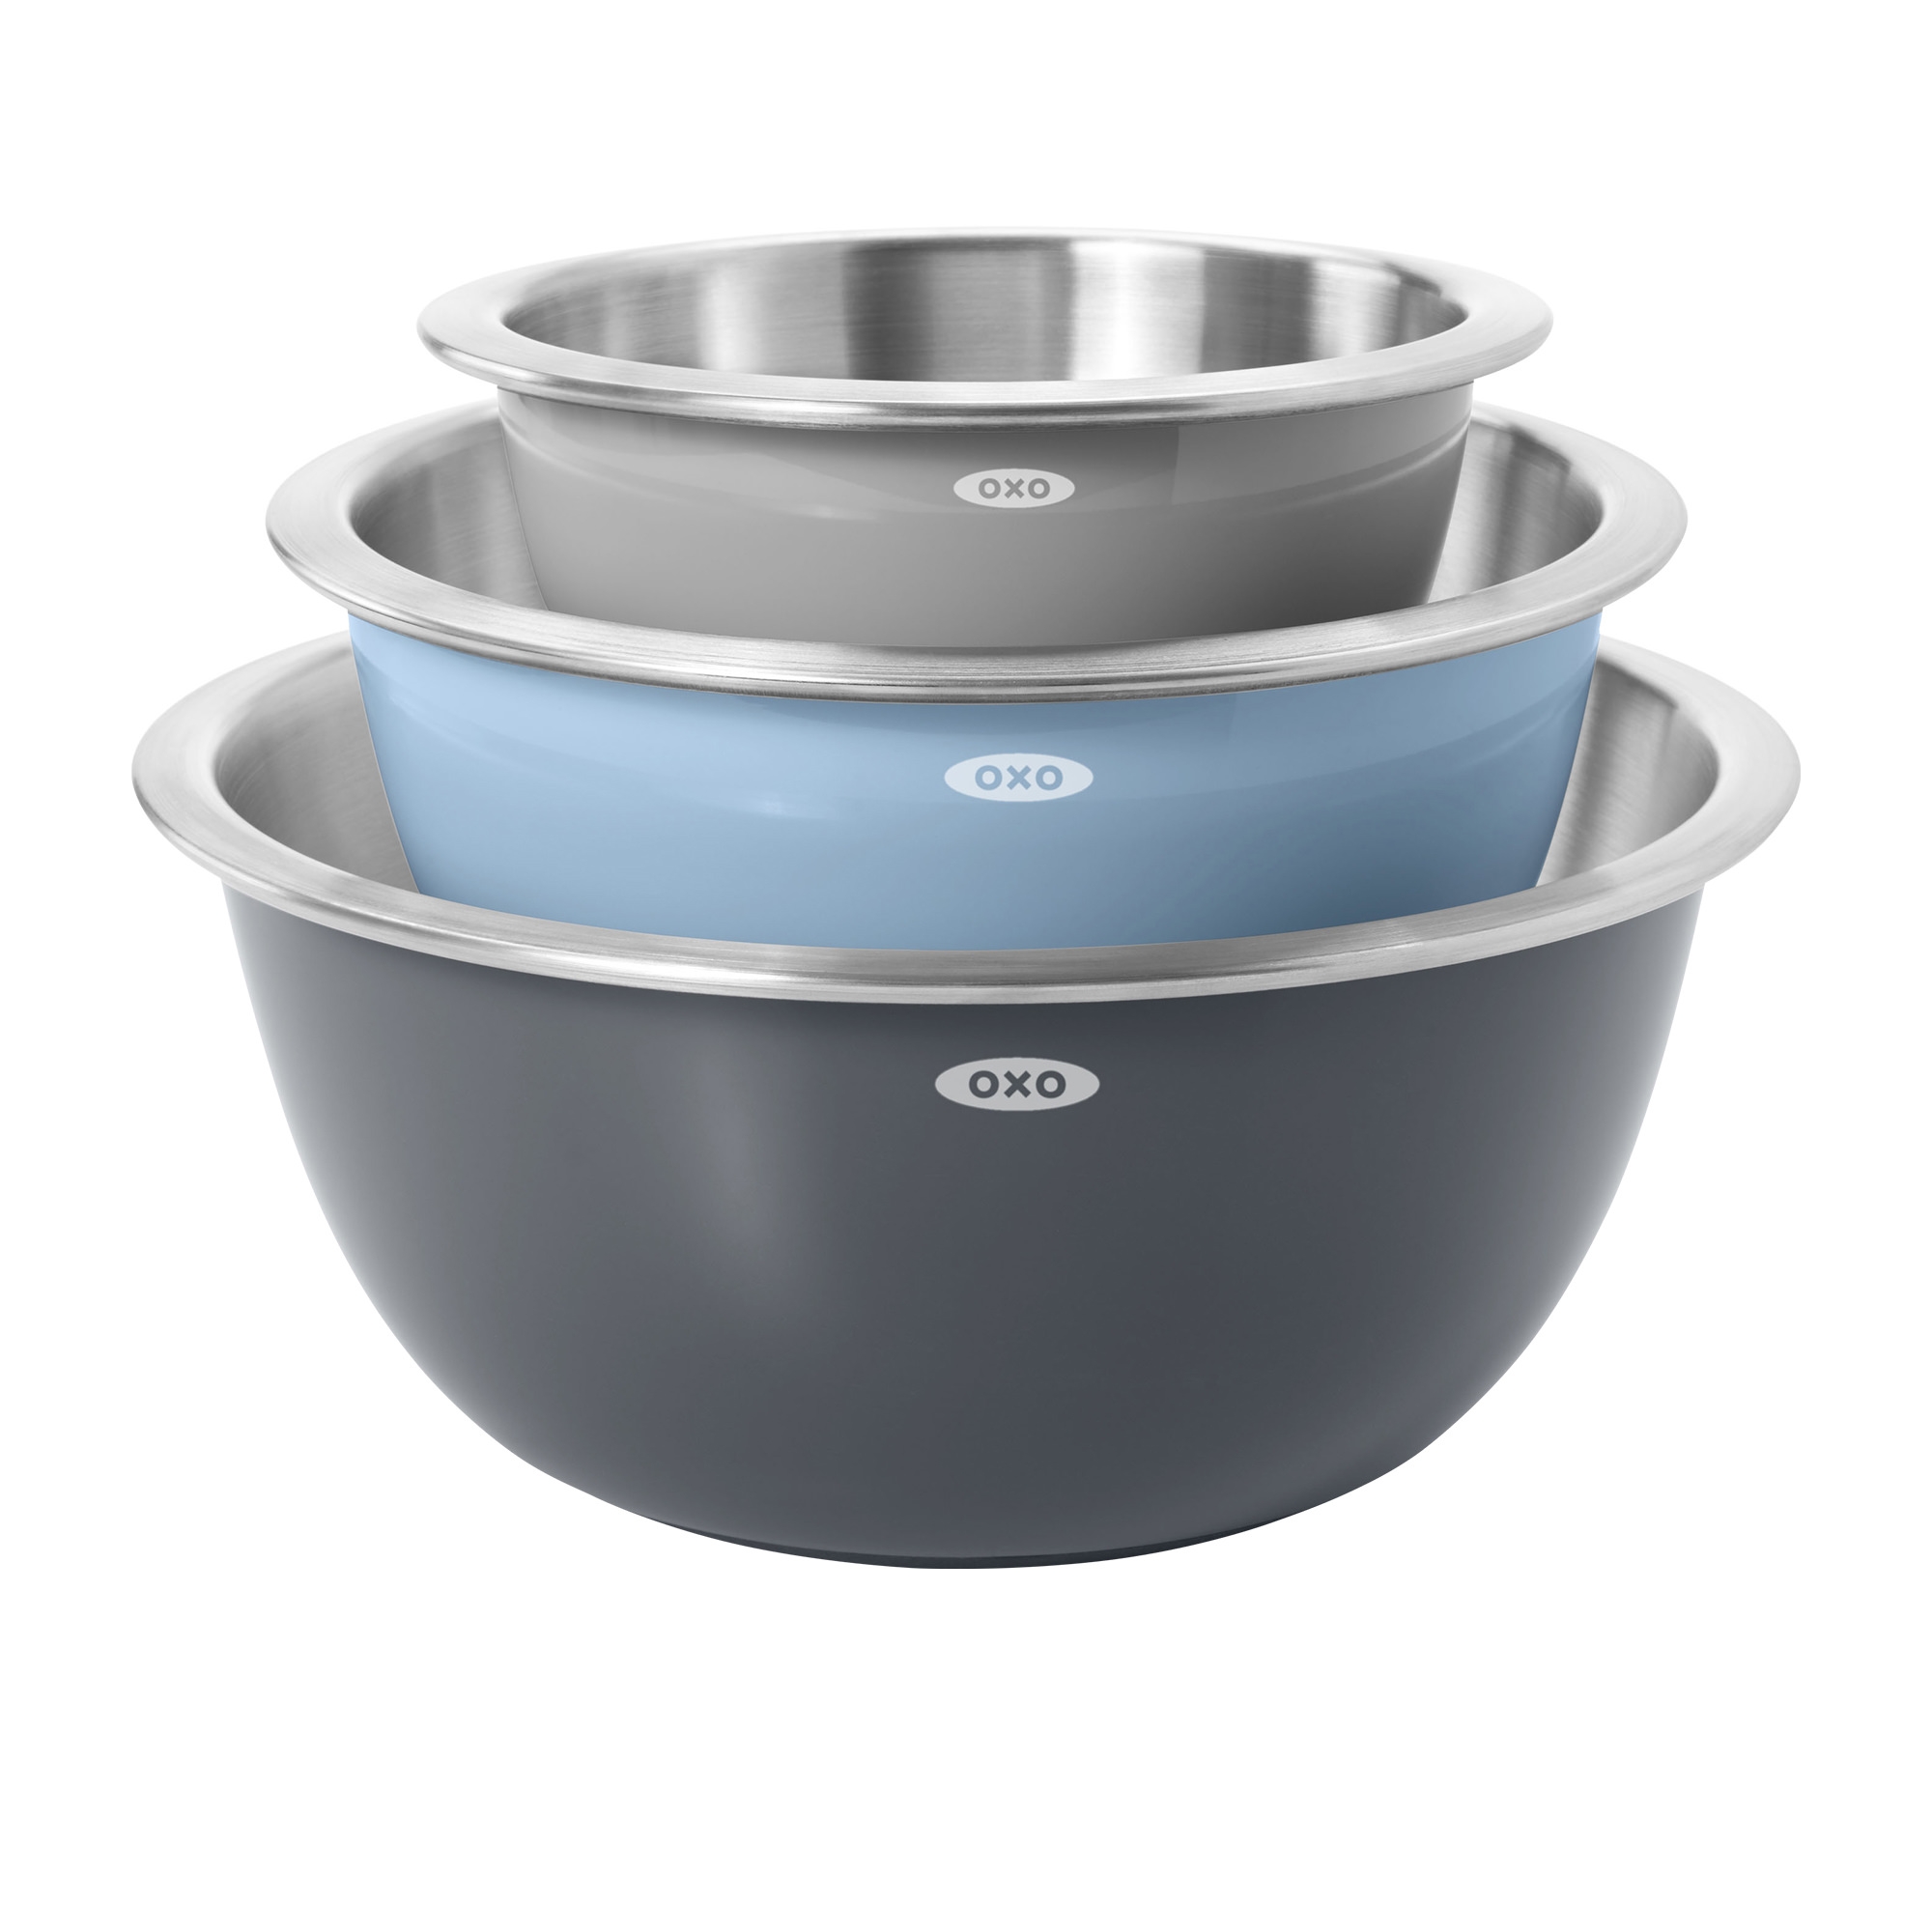 OXO Good Grips Stainless Steel Insulated Mixing Bowl Set 3pc Image 1